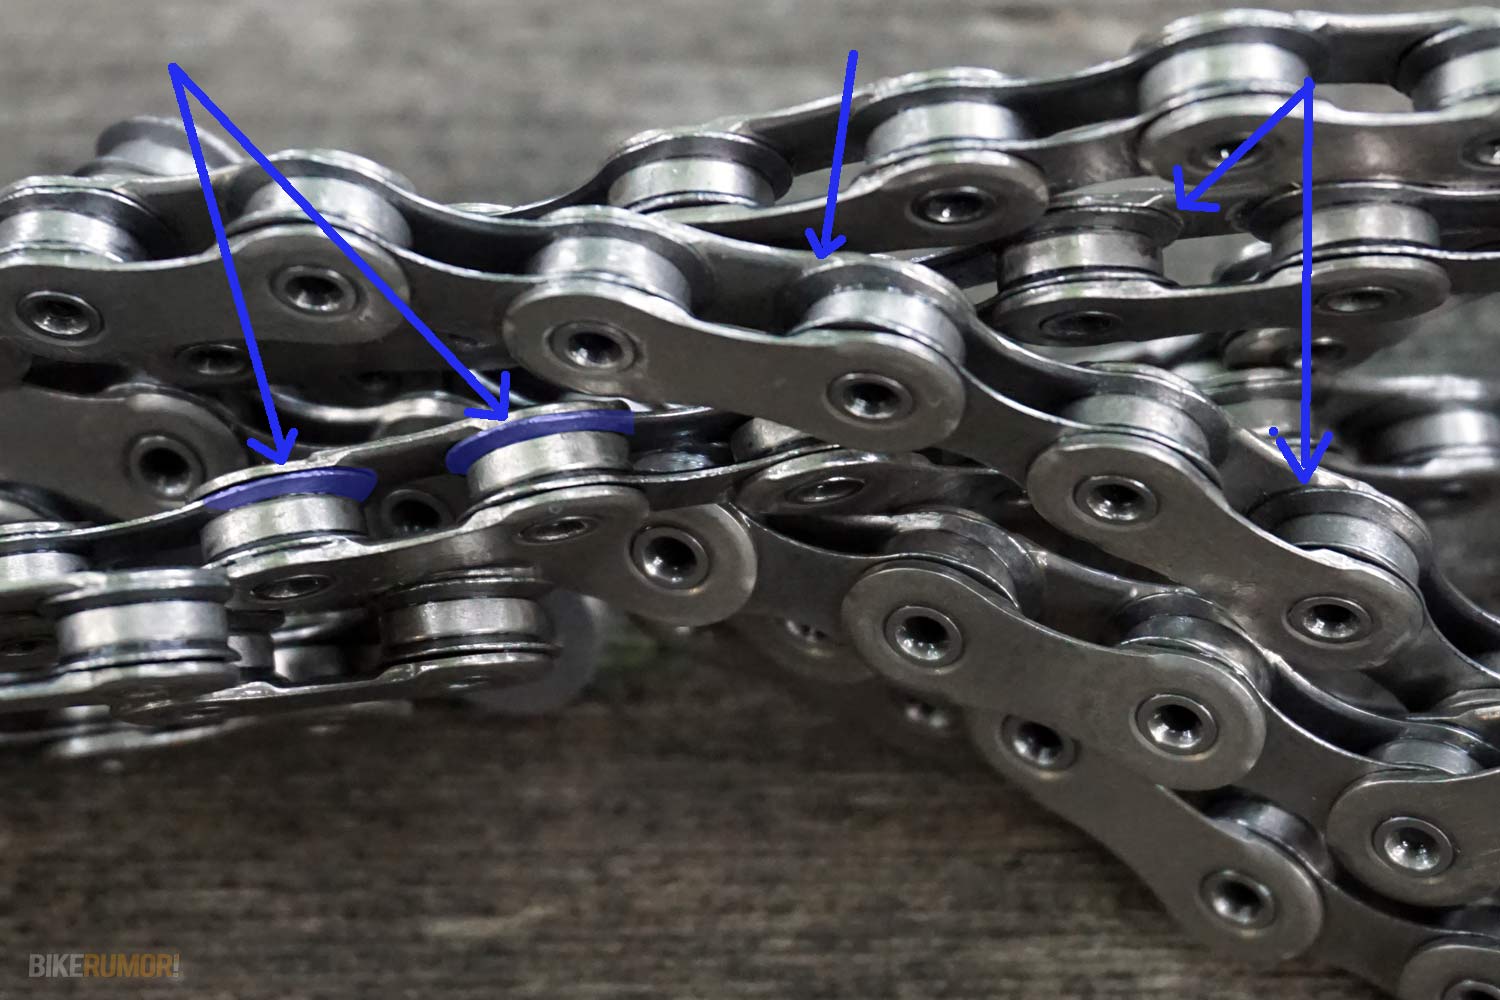 Shimano XTR M9000 chain with dynamic chain engagement